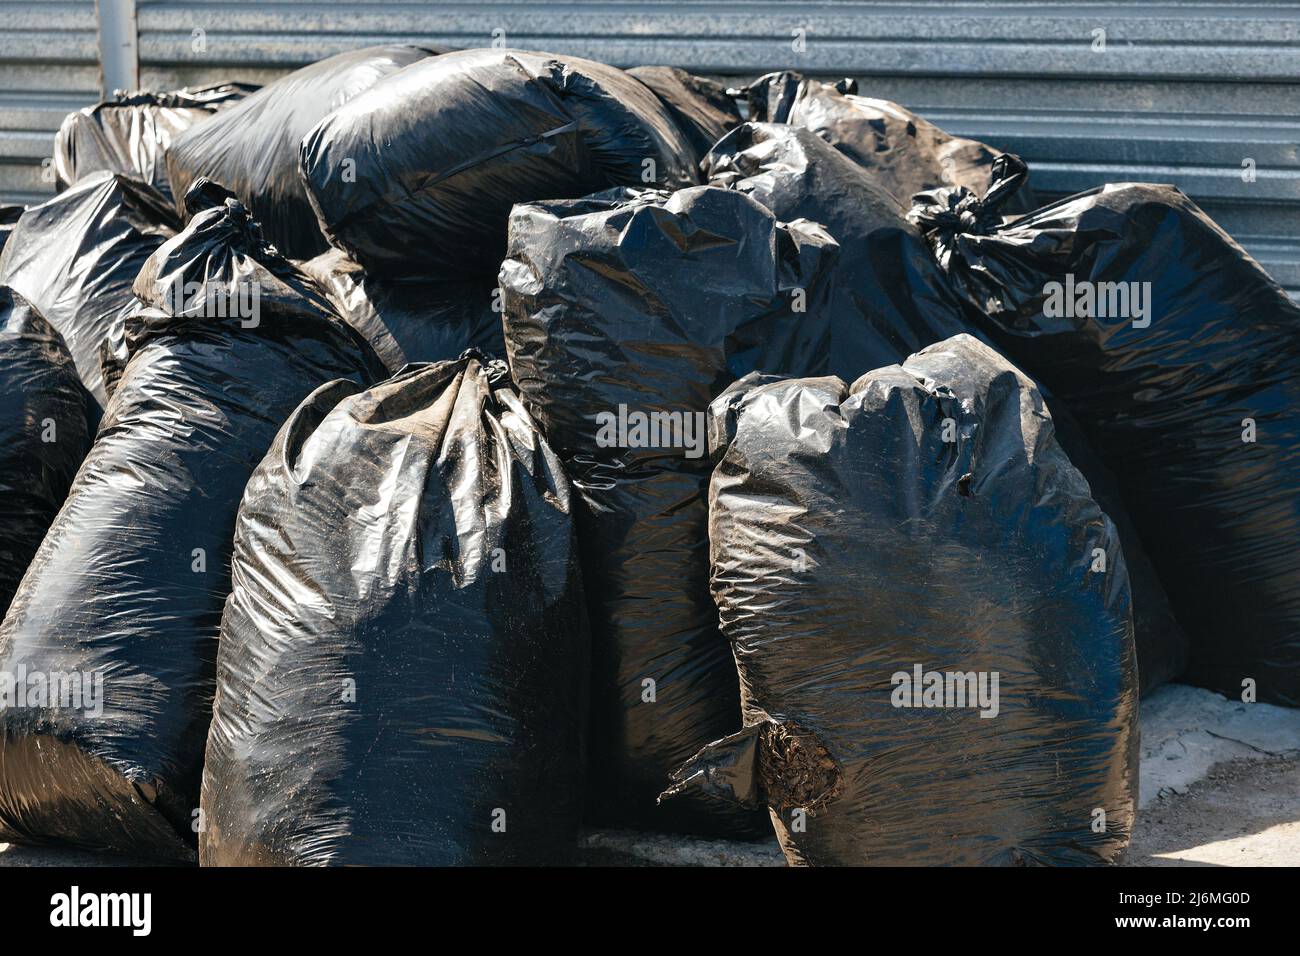 Many large black bags of garbage stand outside in garbage. Cleaning of territory. Let's make world cleaner. Background. Stock Photo